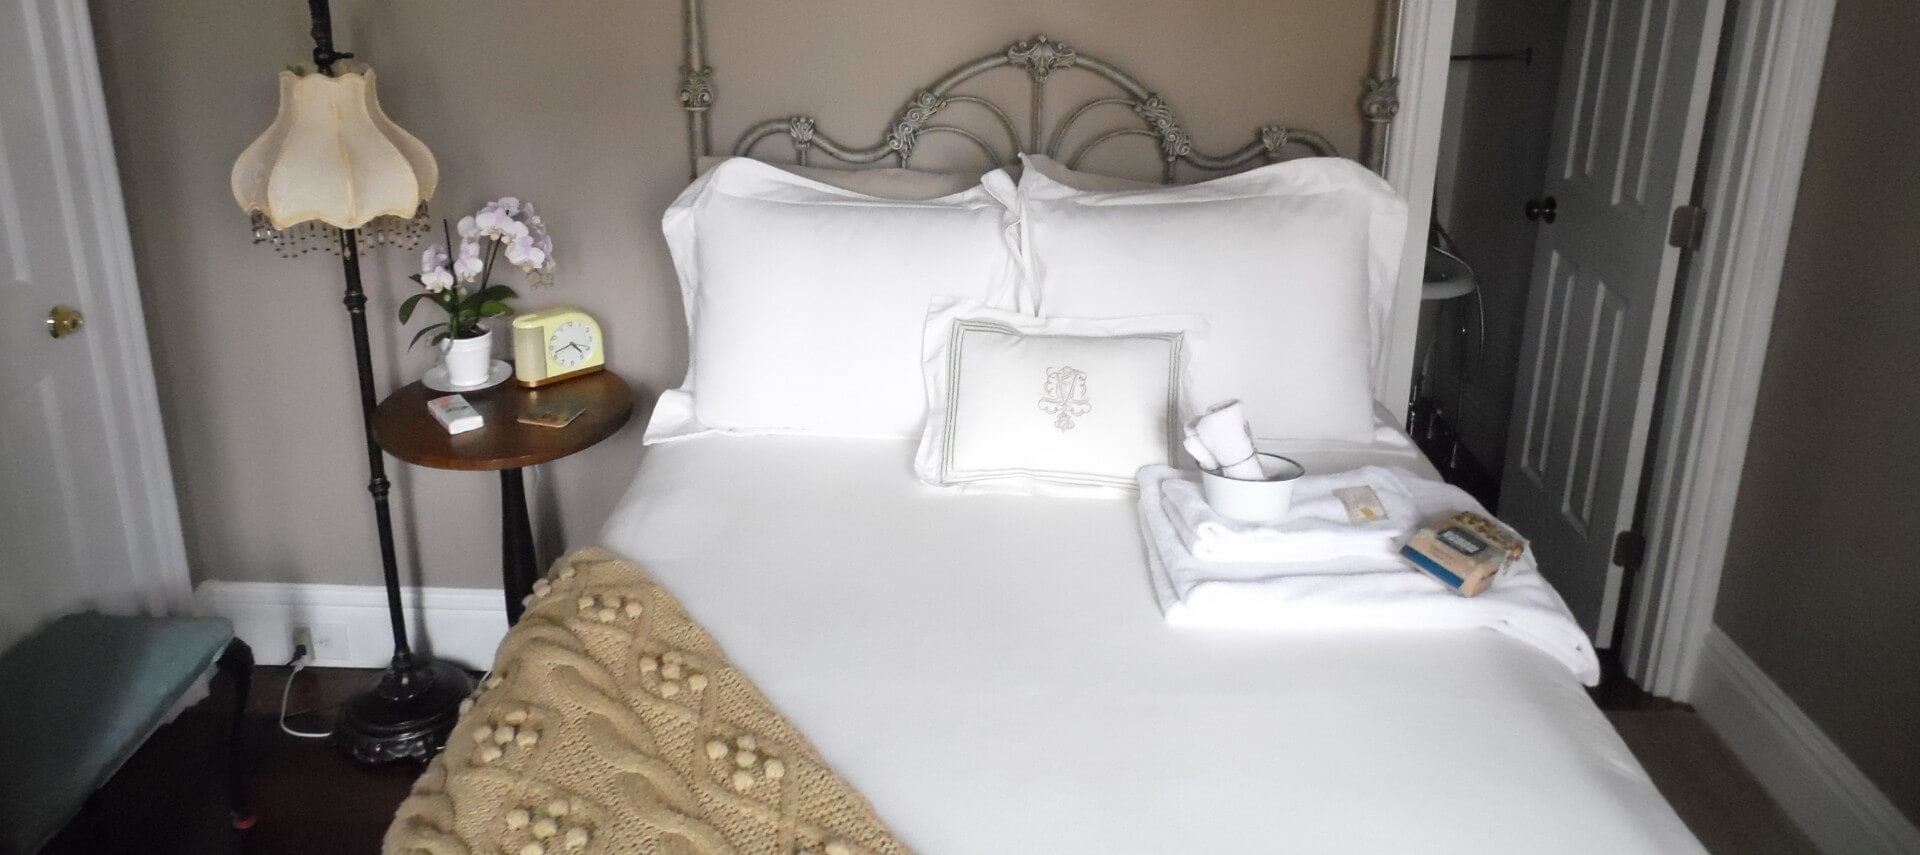 Ornate iron bed made up in fluffy white bedding with a wooden side table.